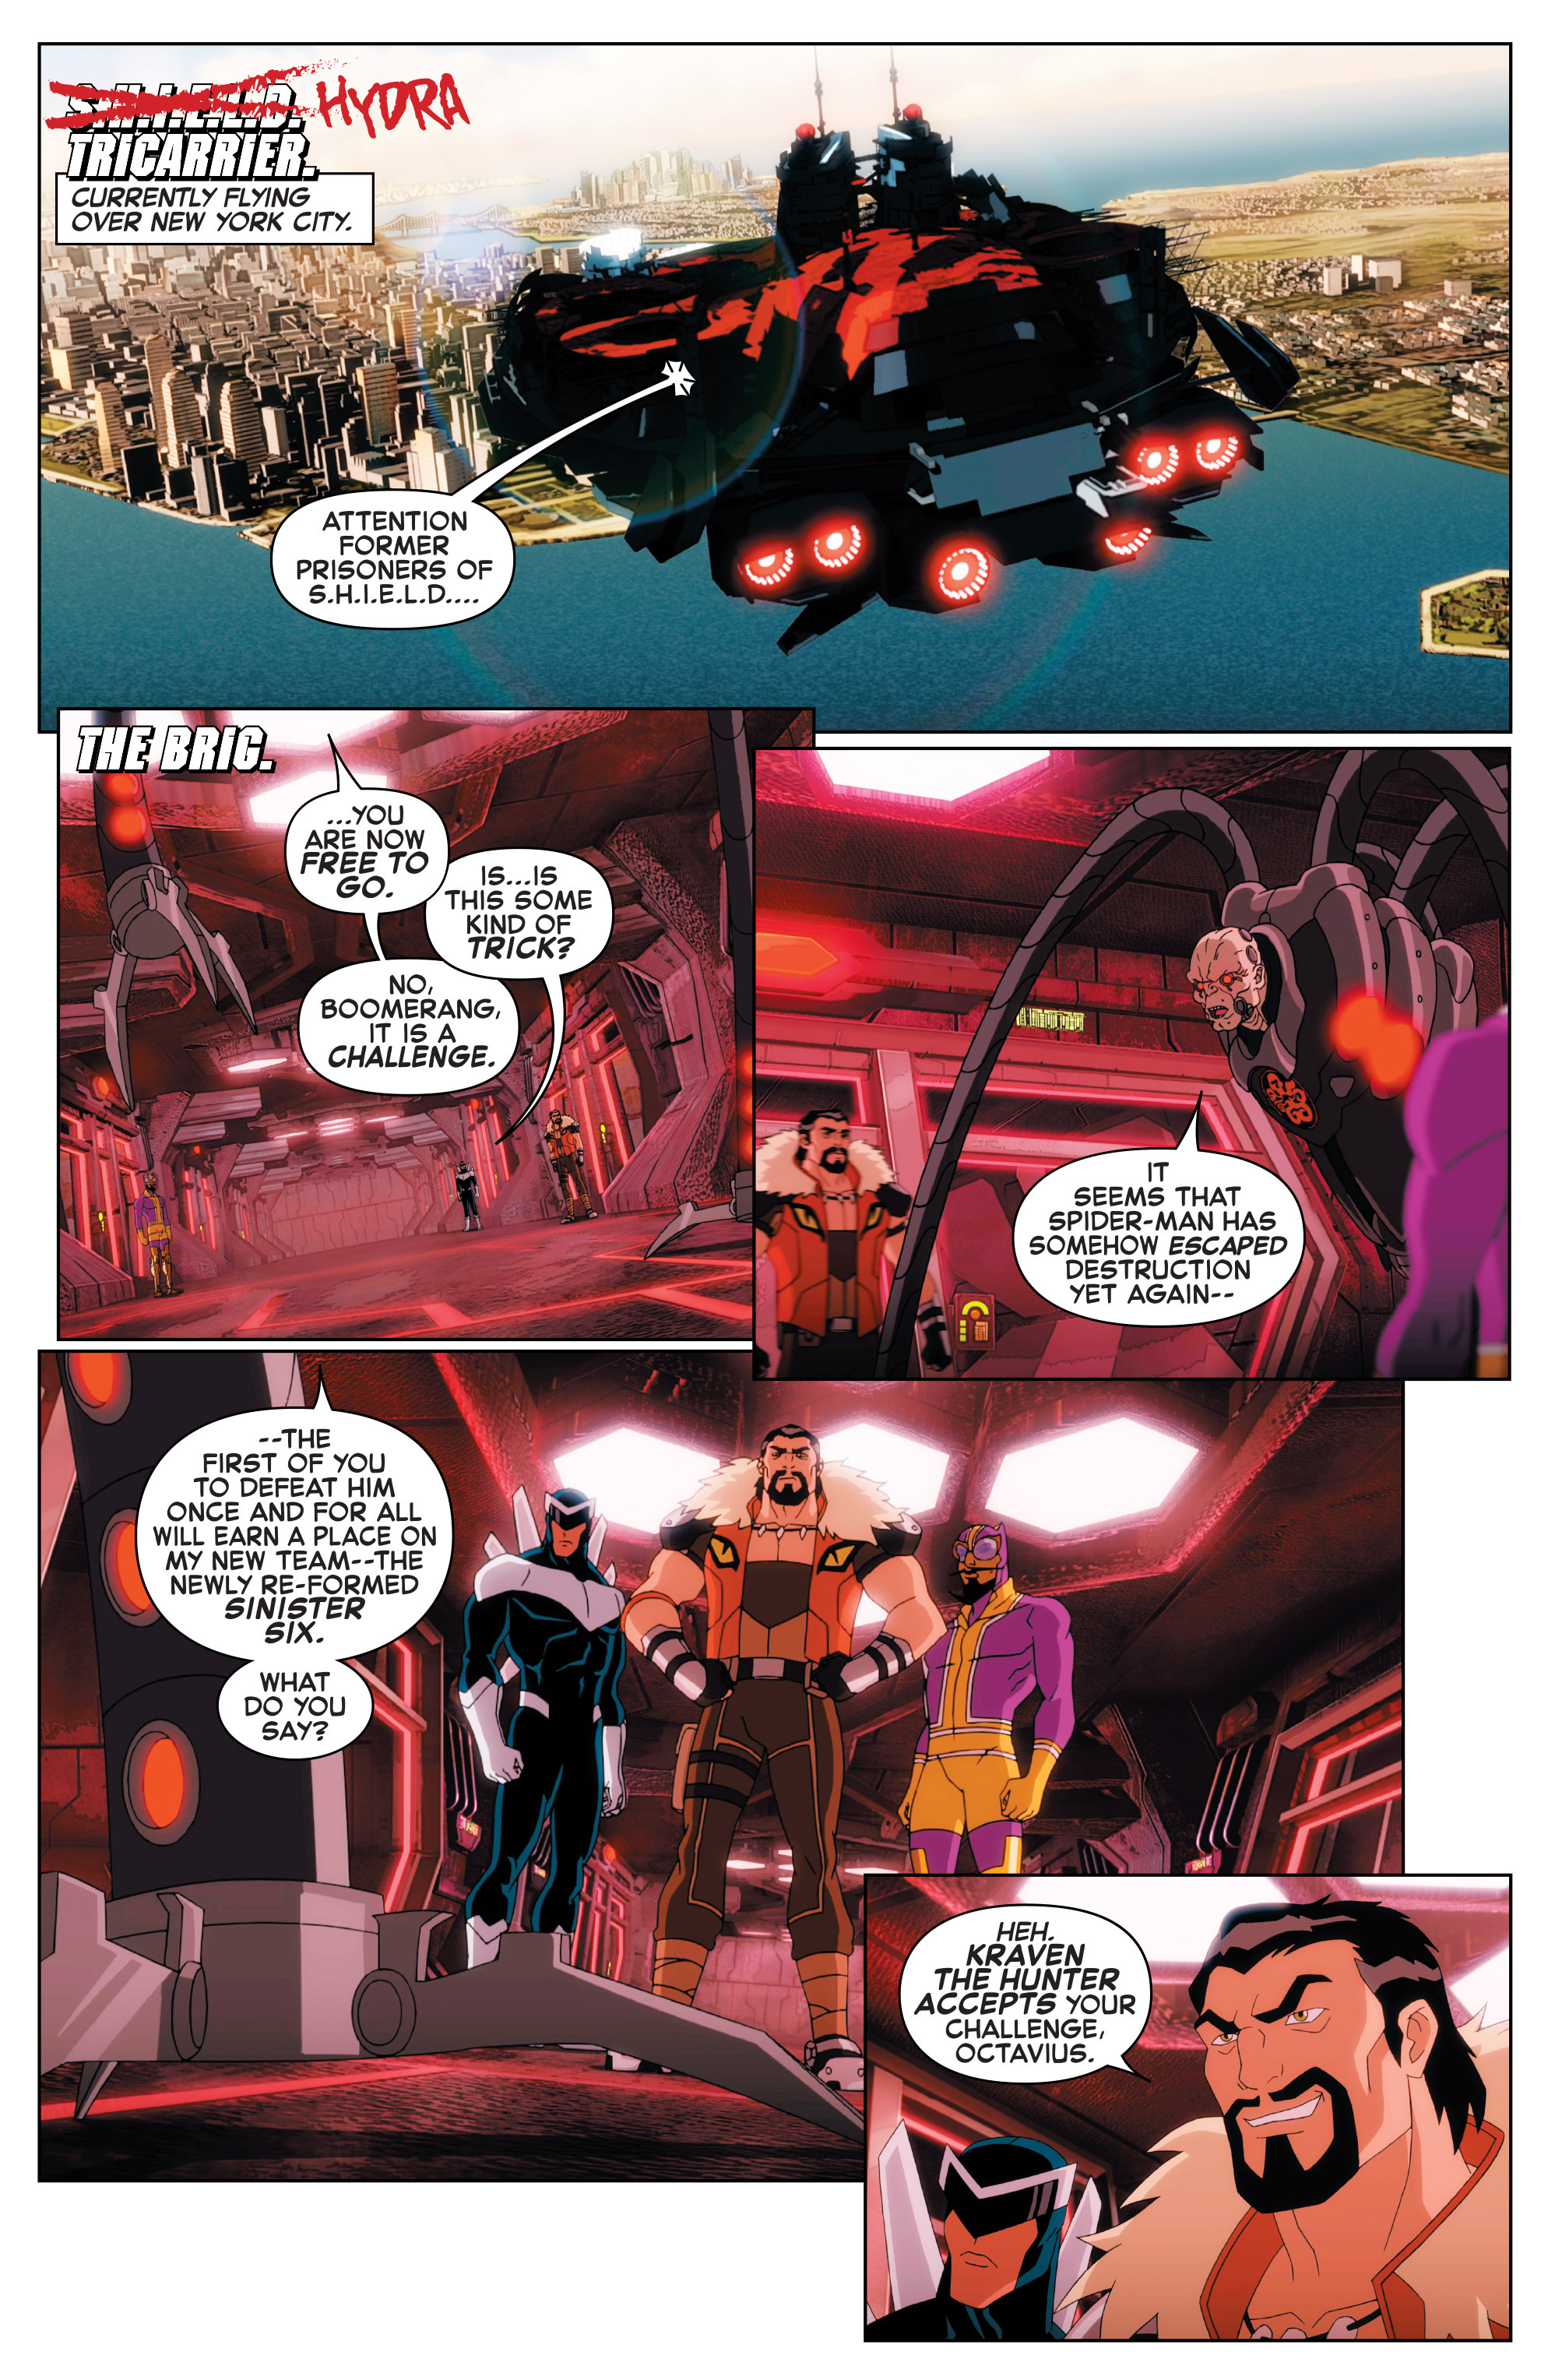 Marvel Universe Ultimate Spider-Man vs. The Sinister Six: Chapter 2 - Page 3